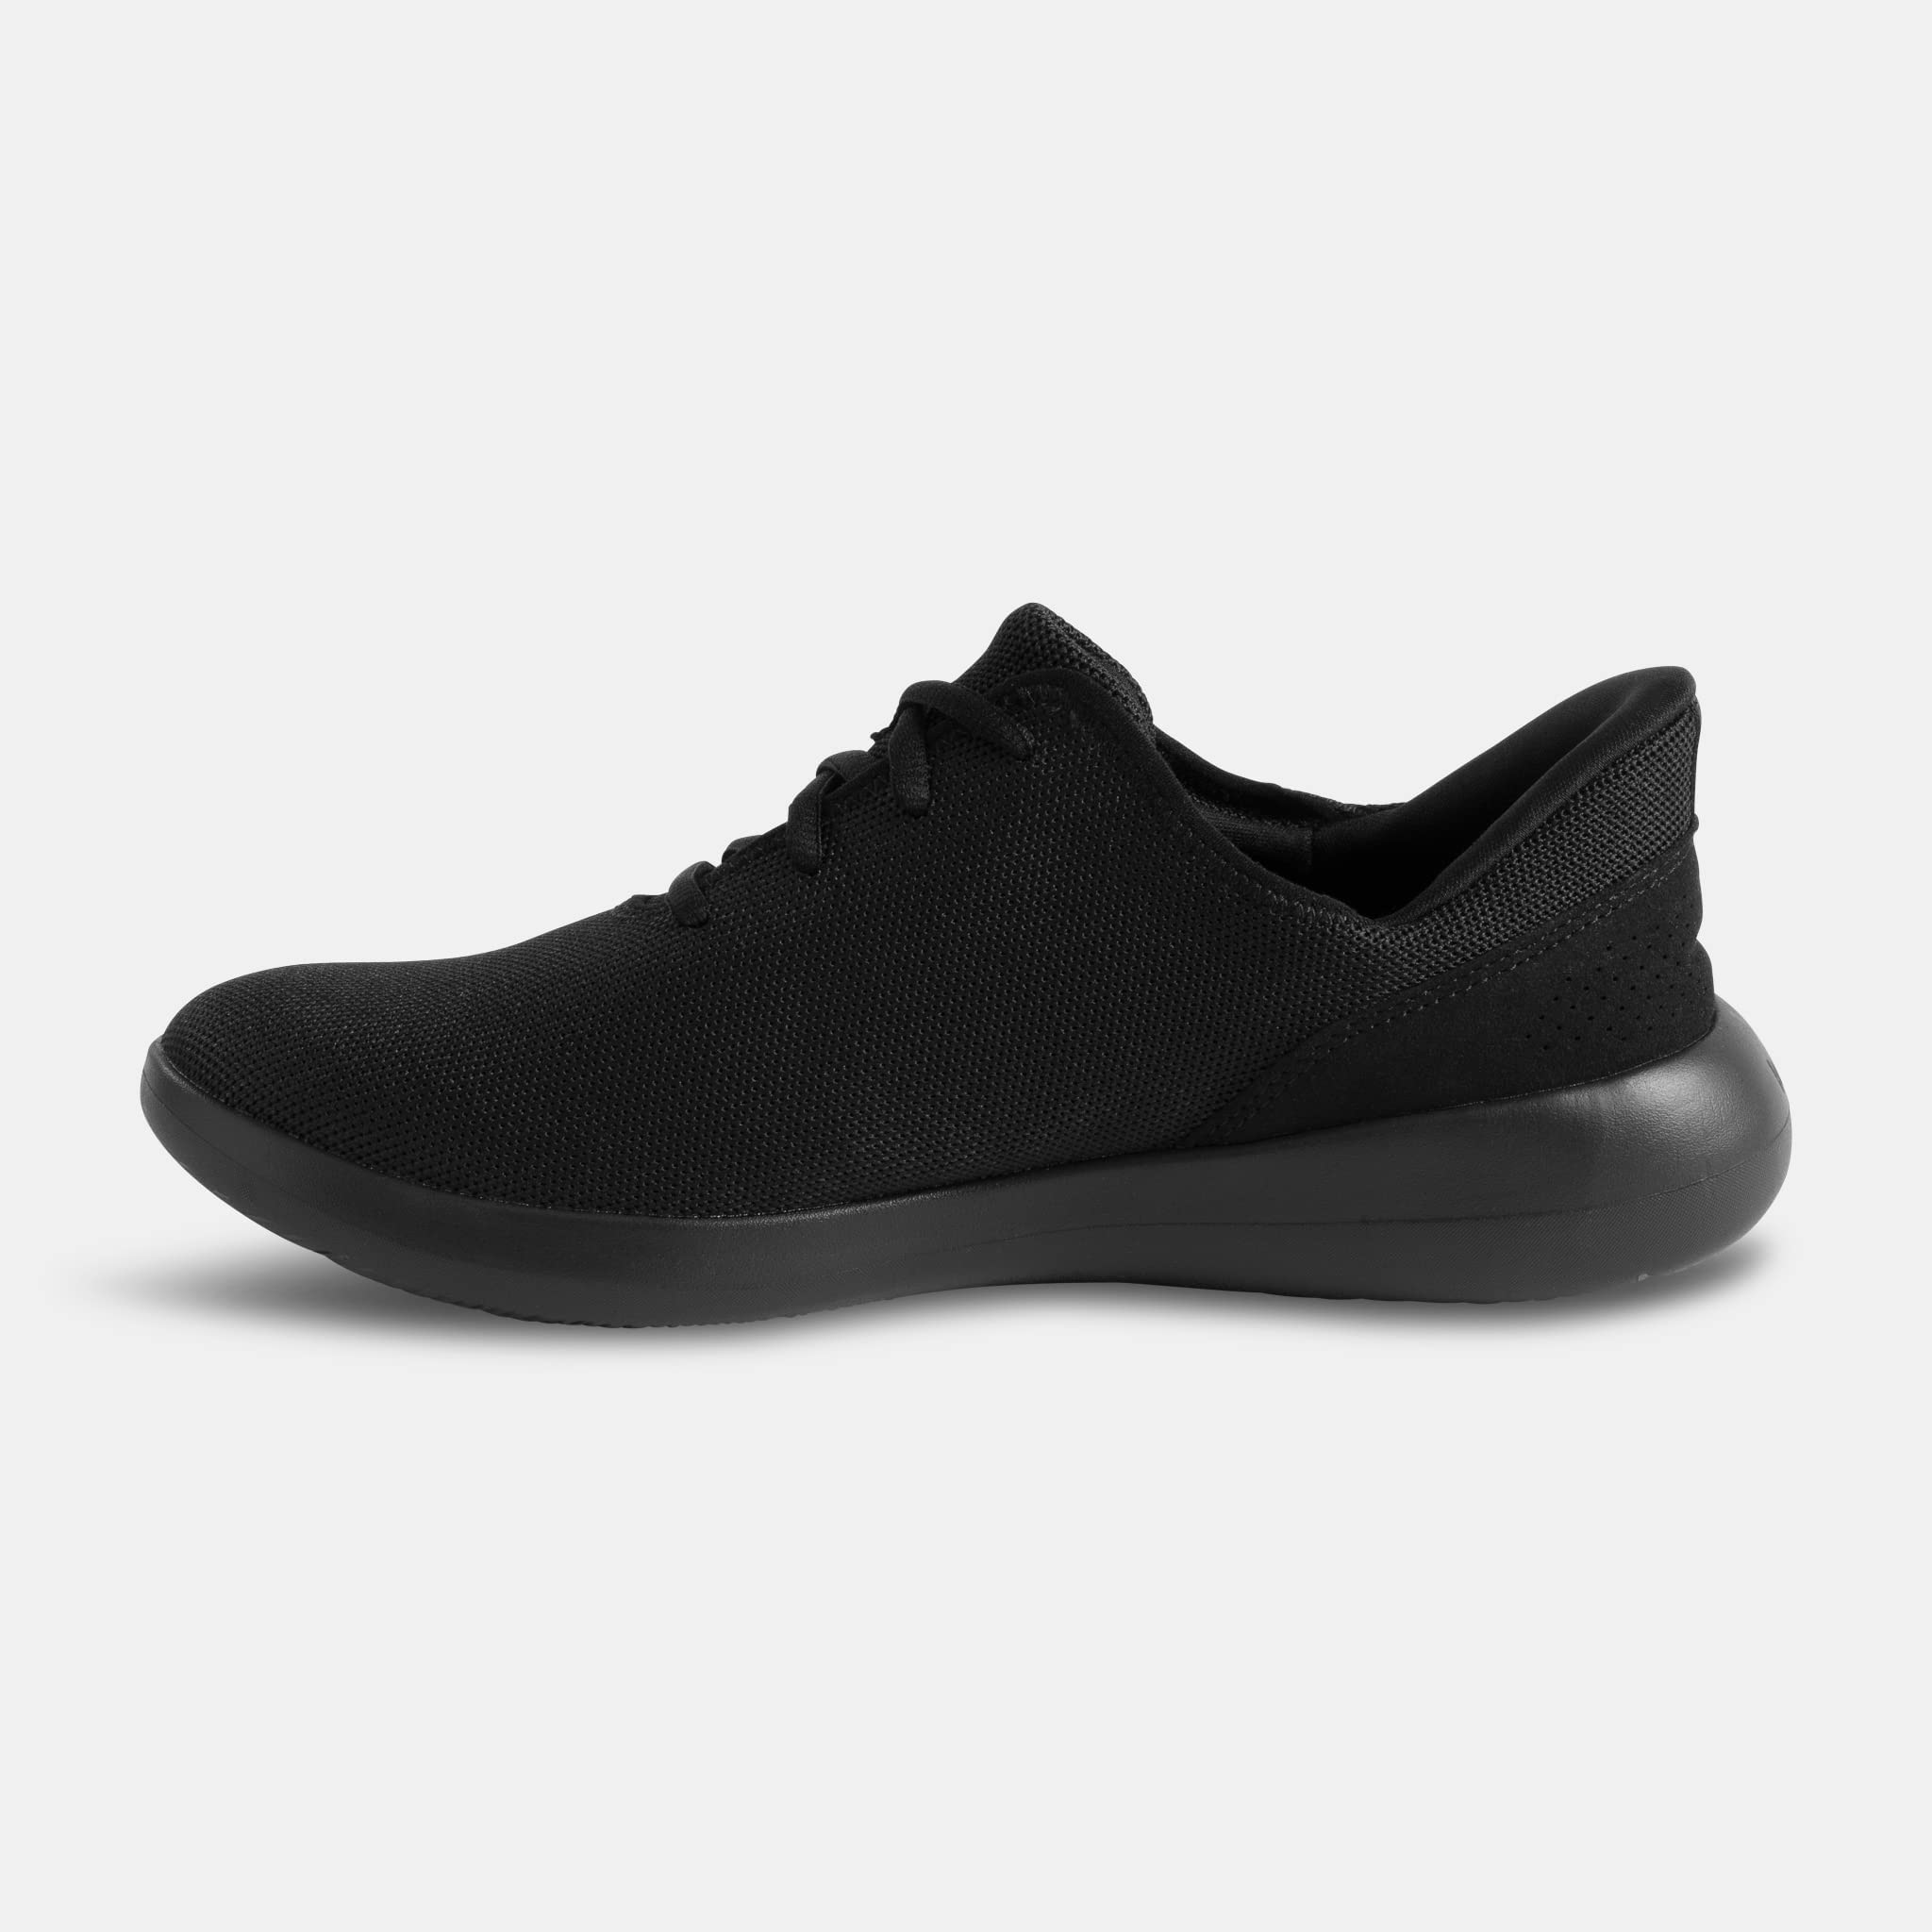 Kizik The Madrid Eco-Knit Slip-On Sneakers, Casual Trendy Shoes for Women and Men